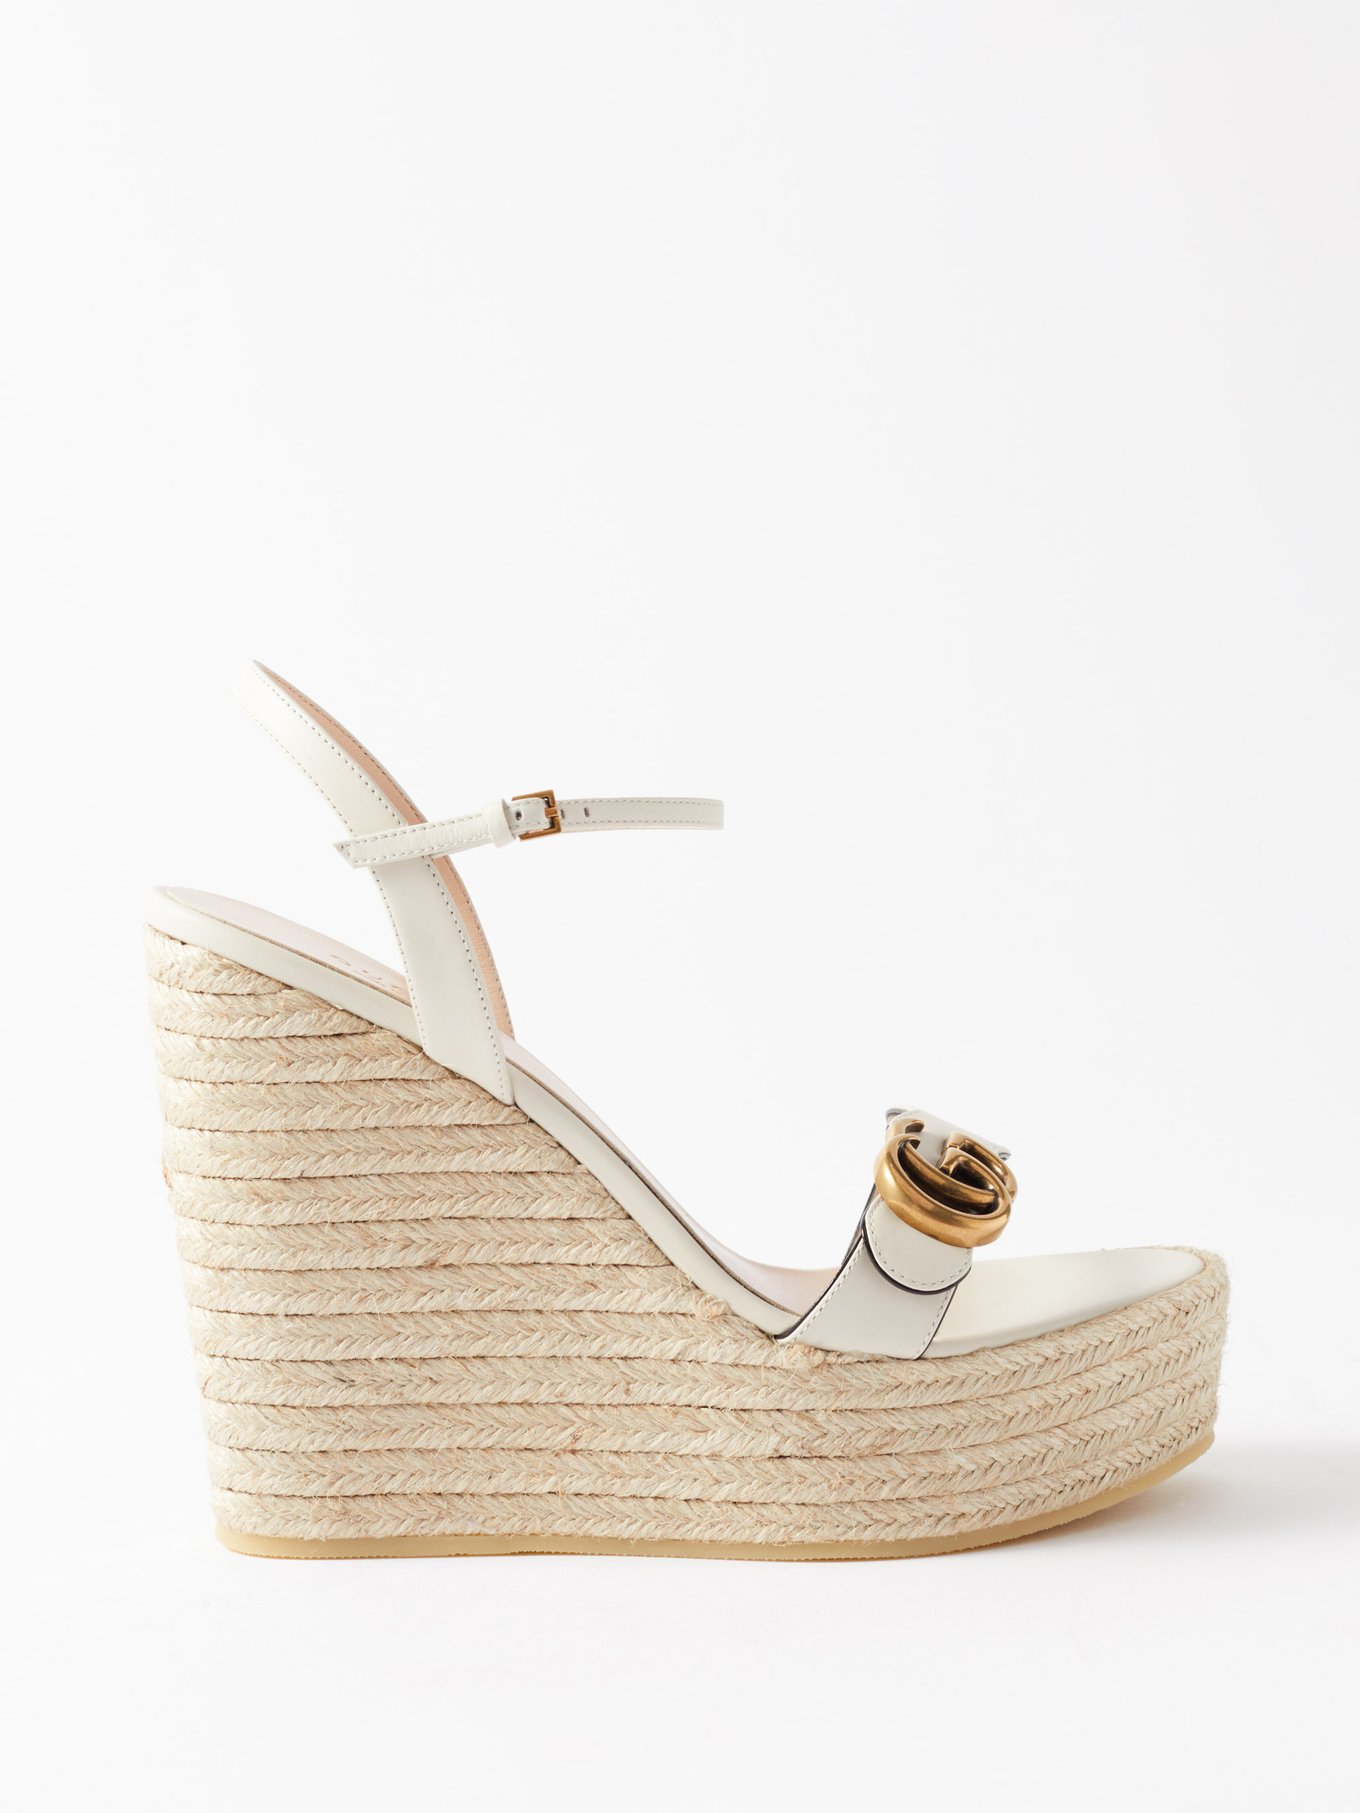 Gucci Double G Wedge Sandals 130 In White